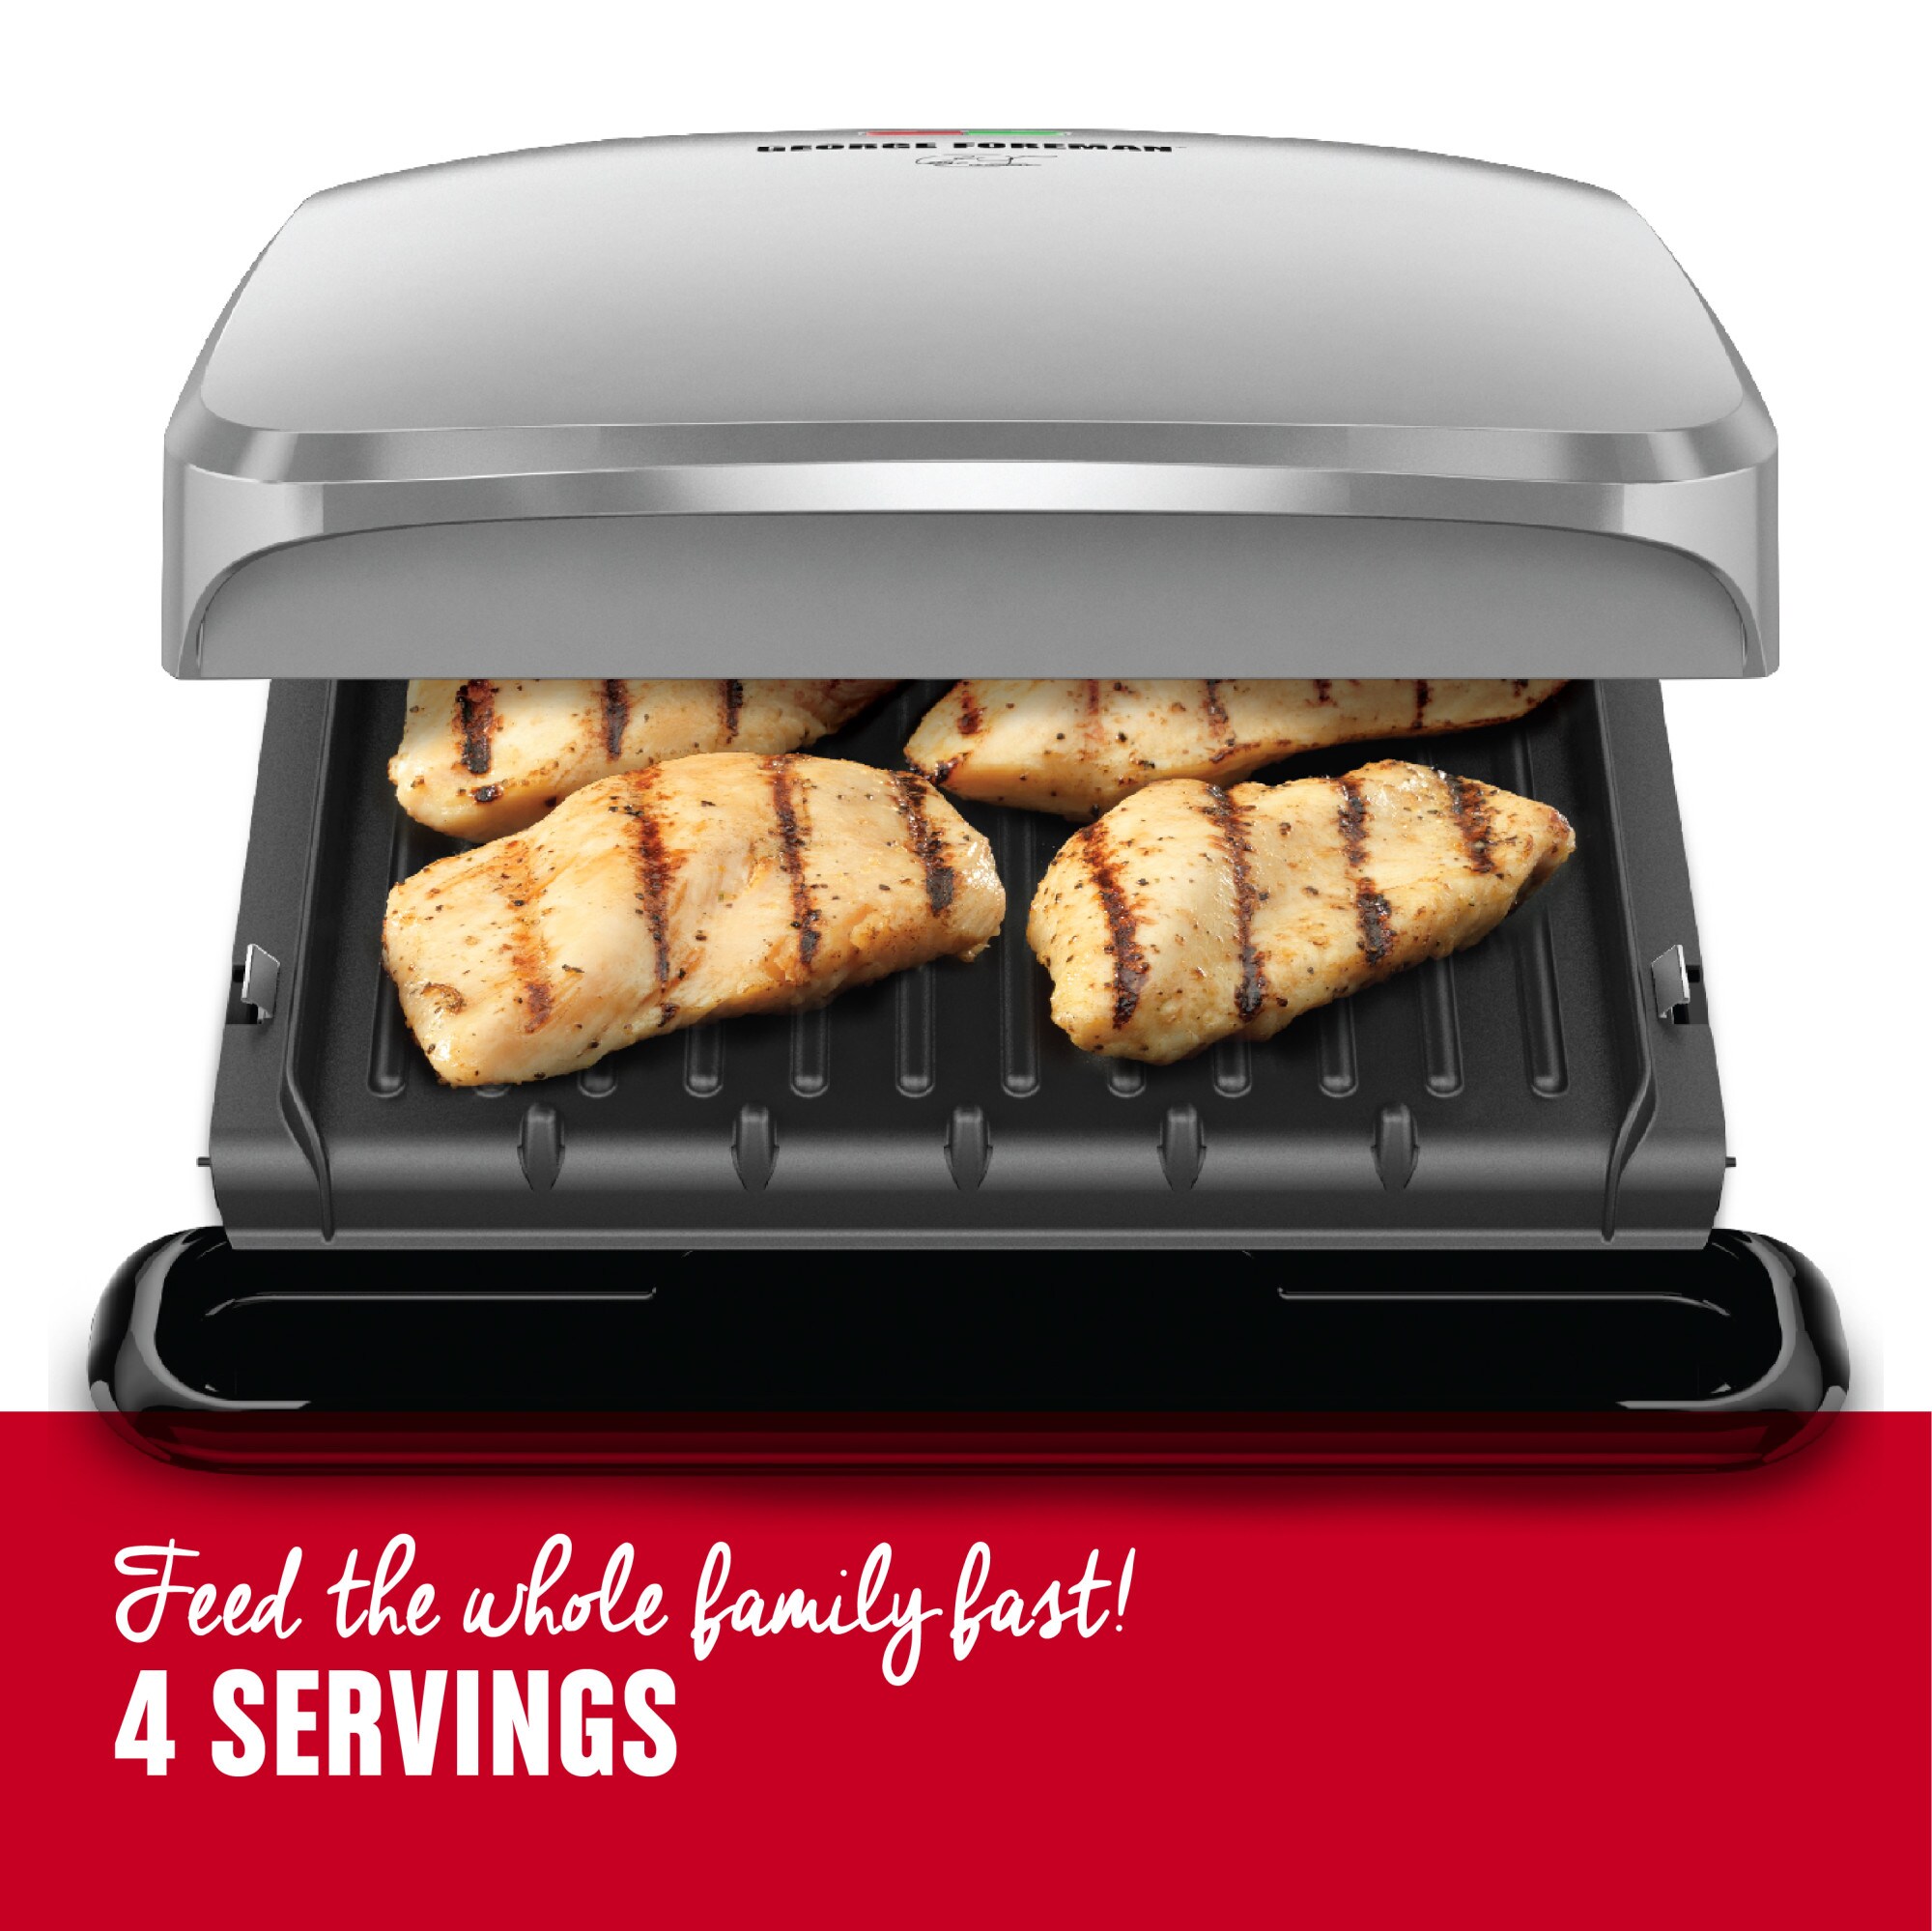 George Foreman 9.2-in L x 6.69-in W Non-Stick Residential